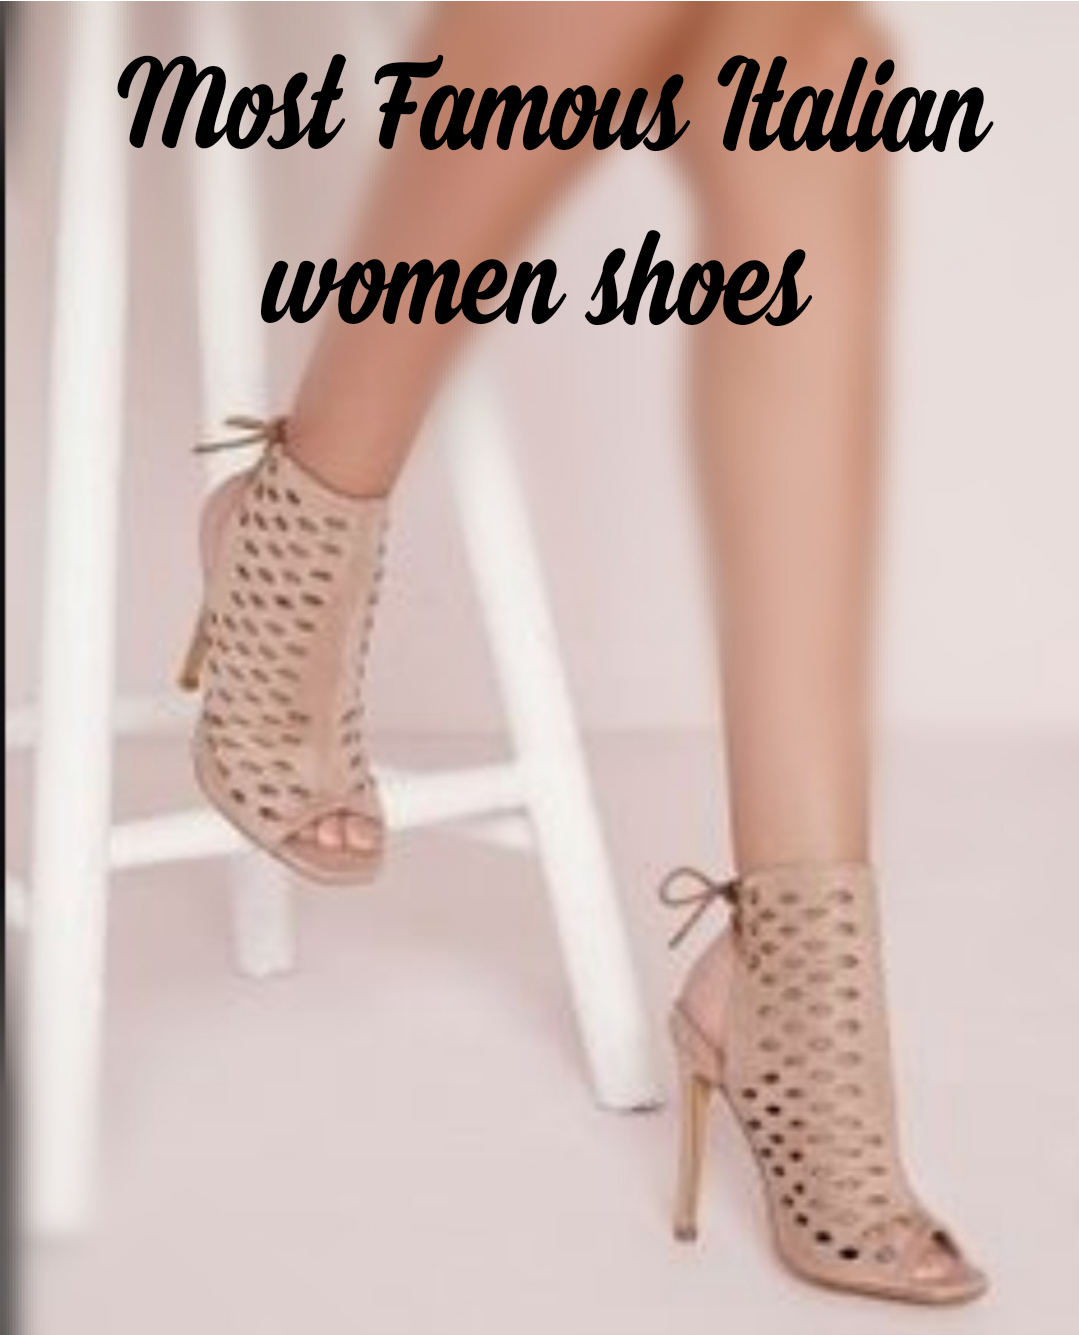 Top 10 Italian Shoes Brands for Women Famous in the World 2020